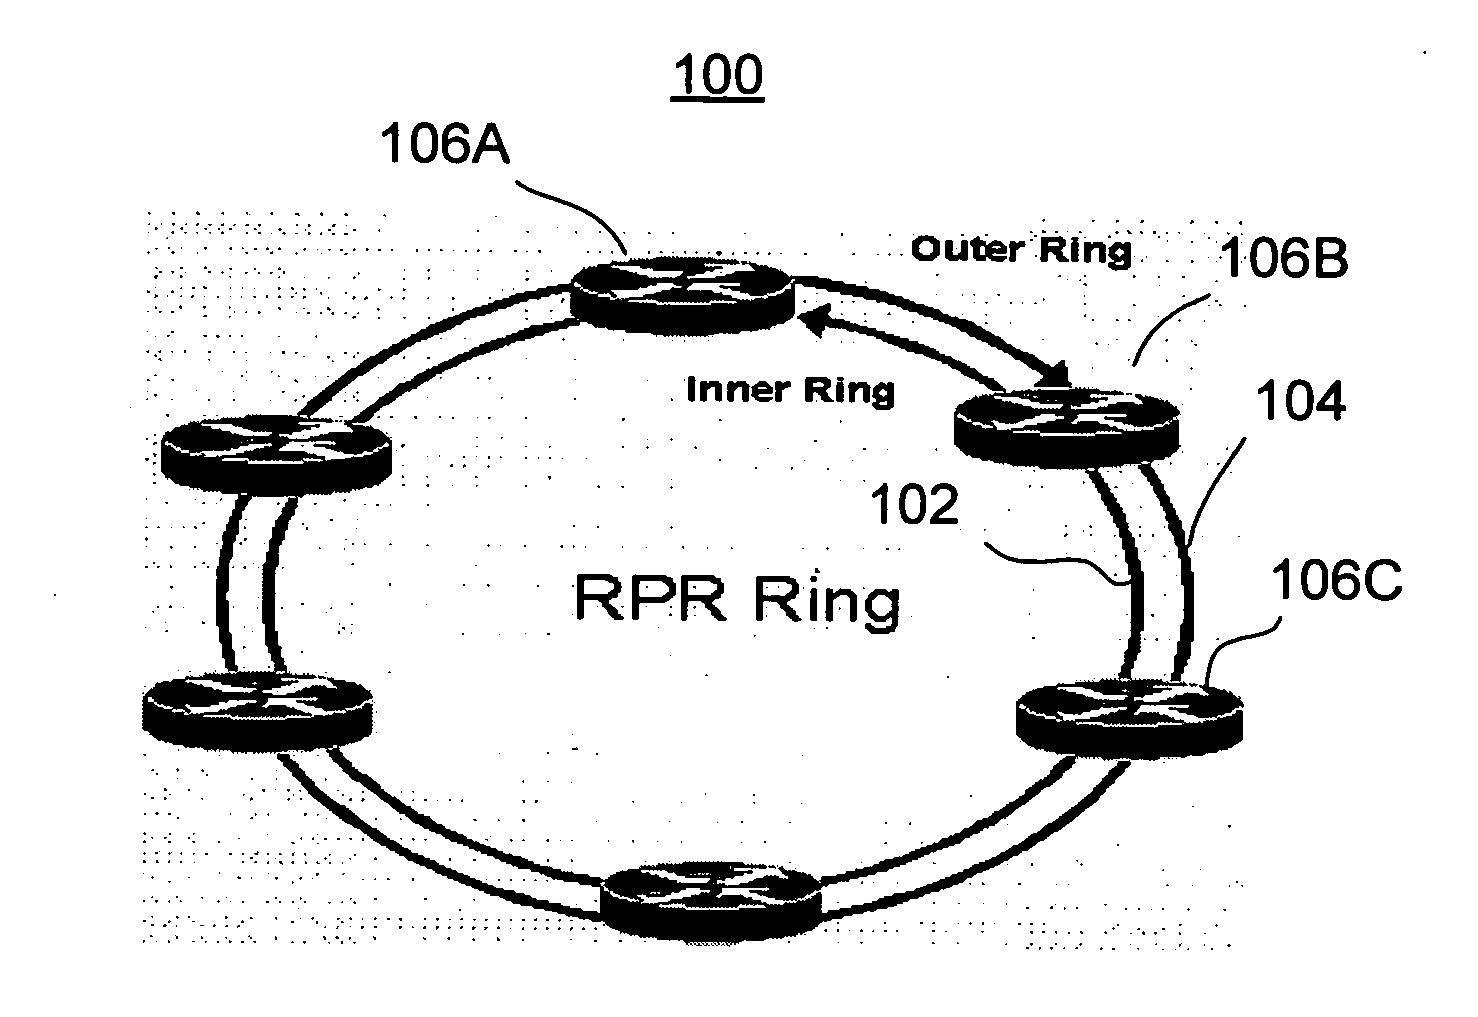 Distributed bandwidth allocation for resilient packet ring networks